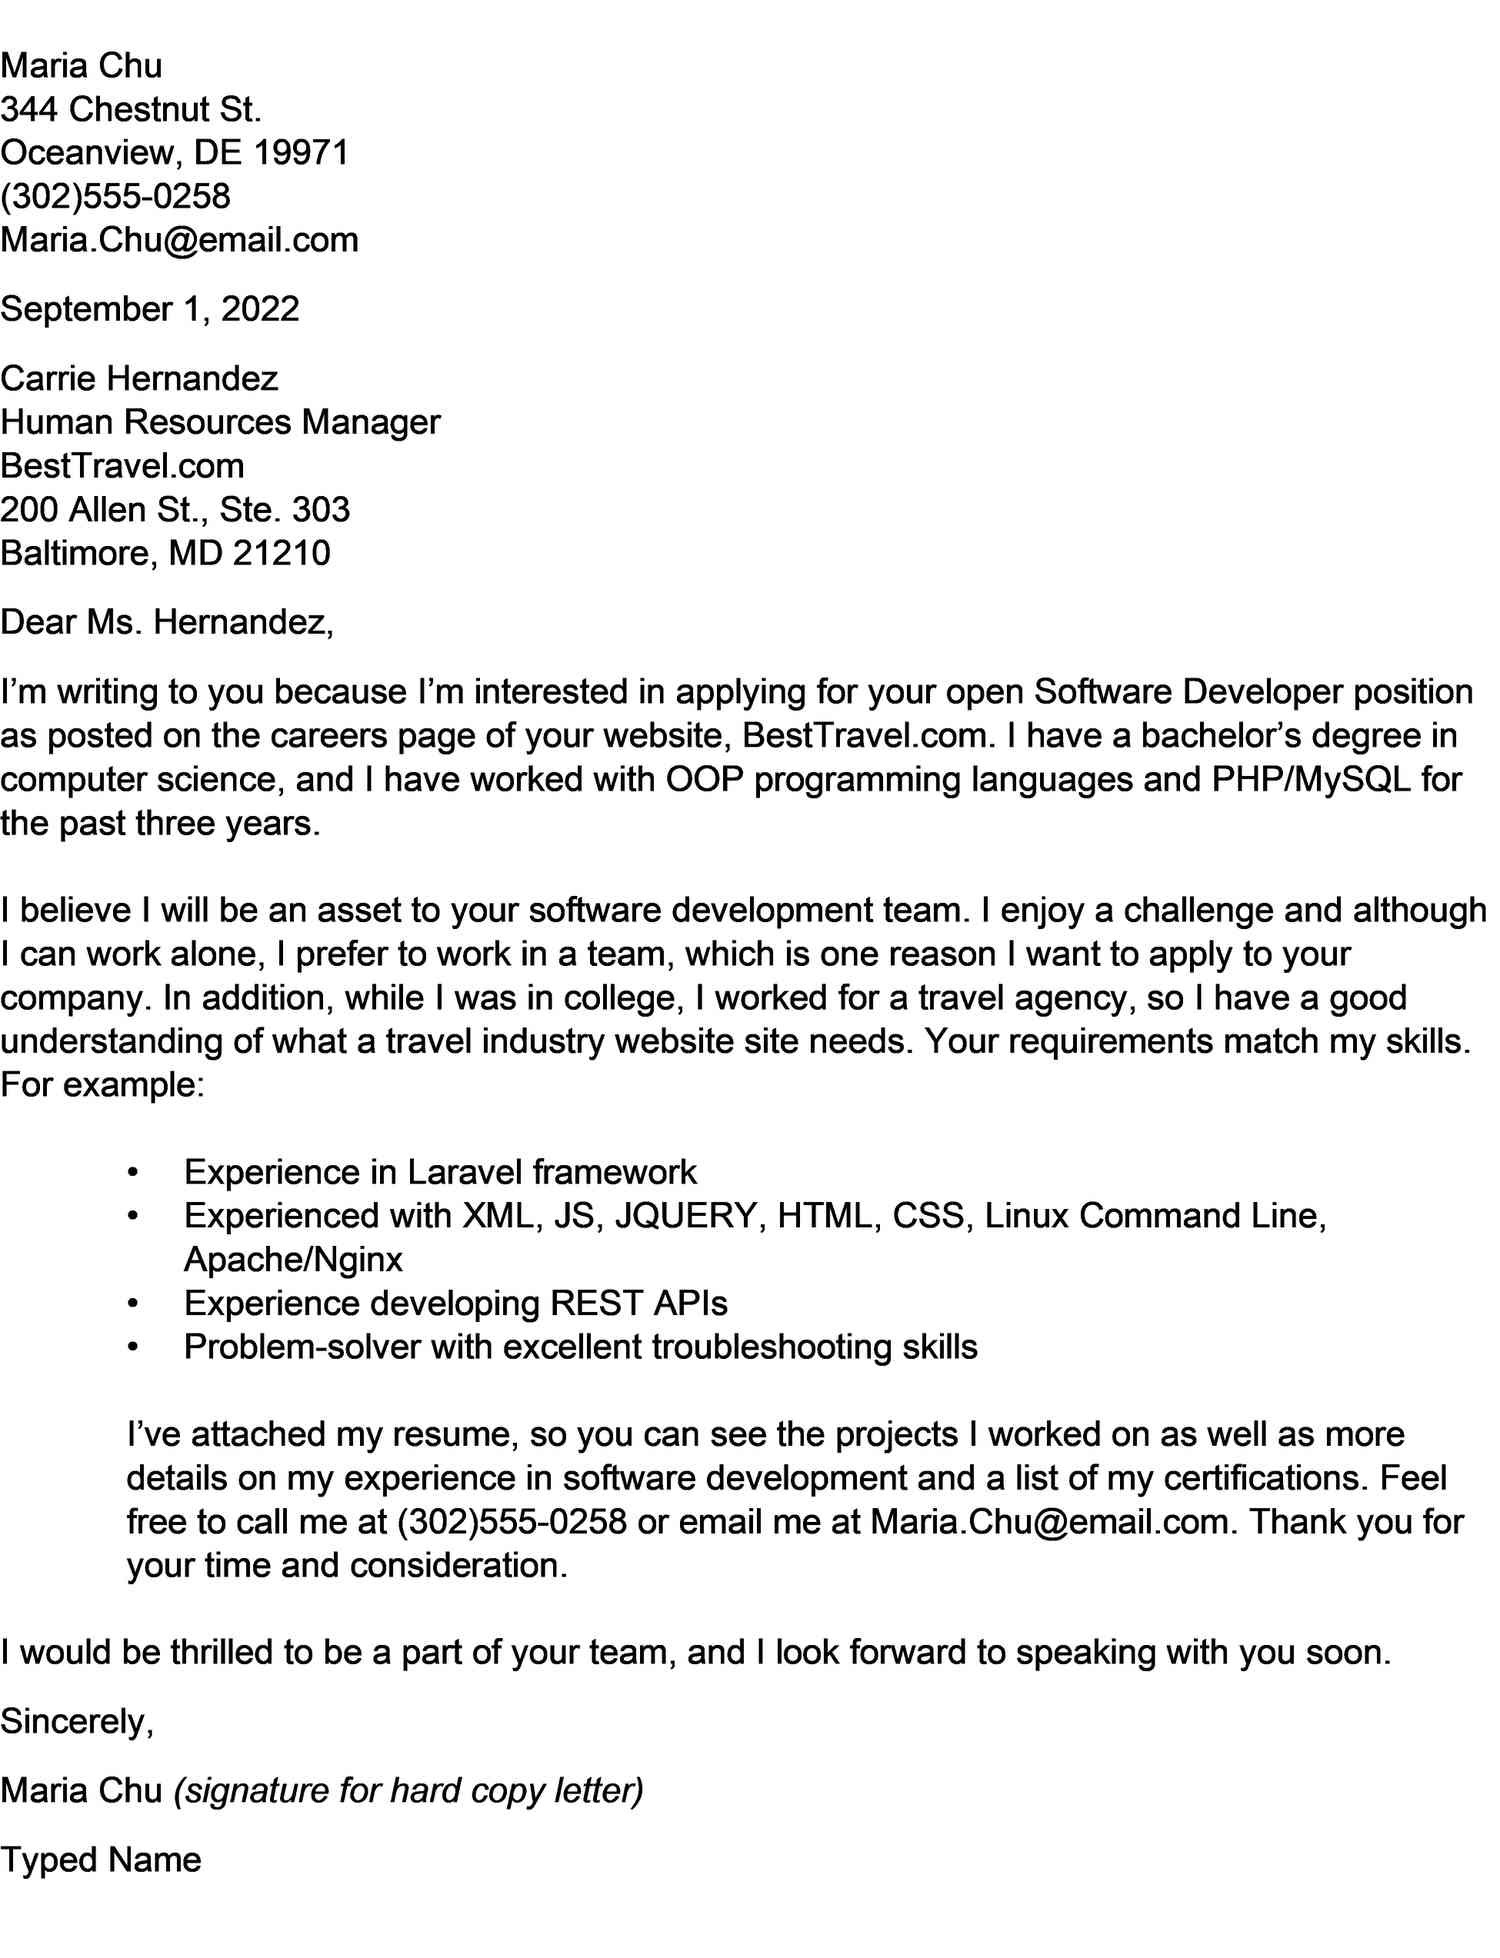 Sample Email Resume to Potential Employer Cover Letter Examples Listed by Type Of Job